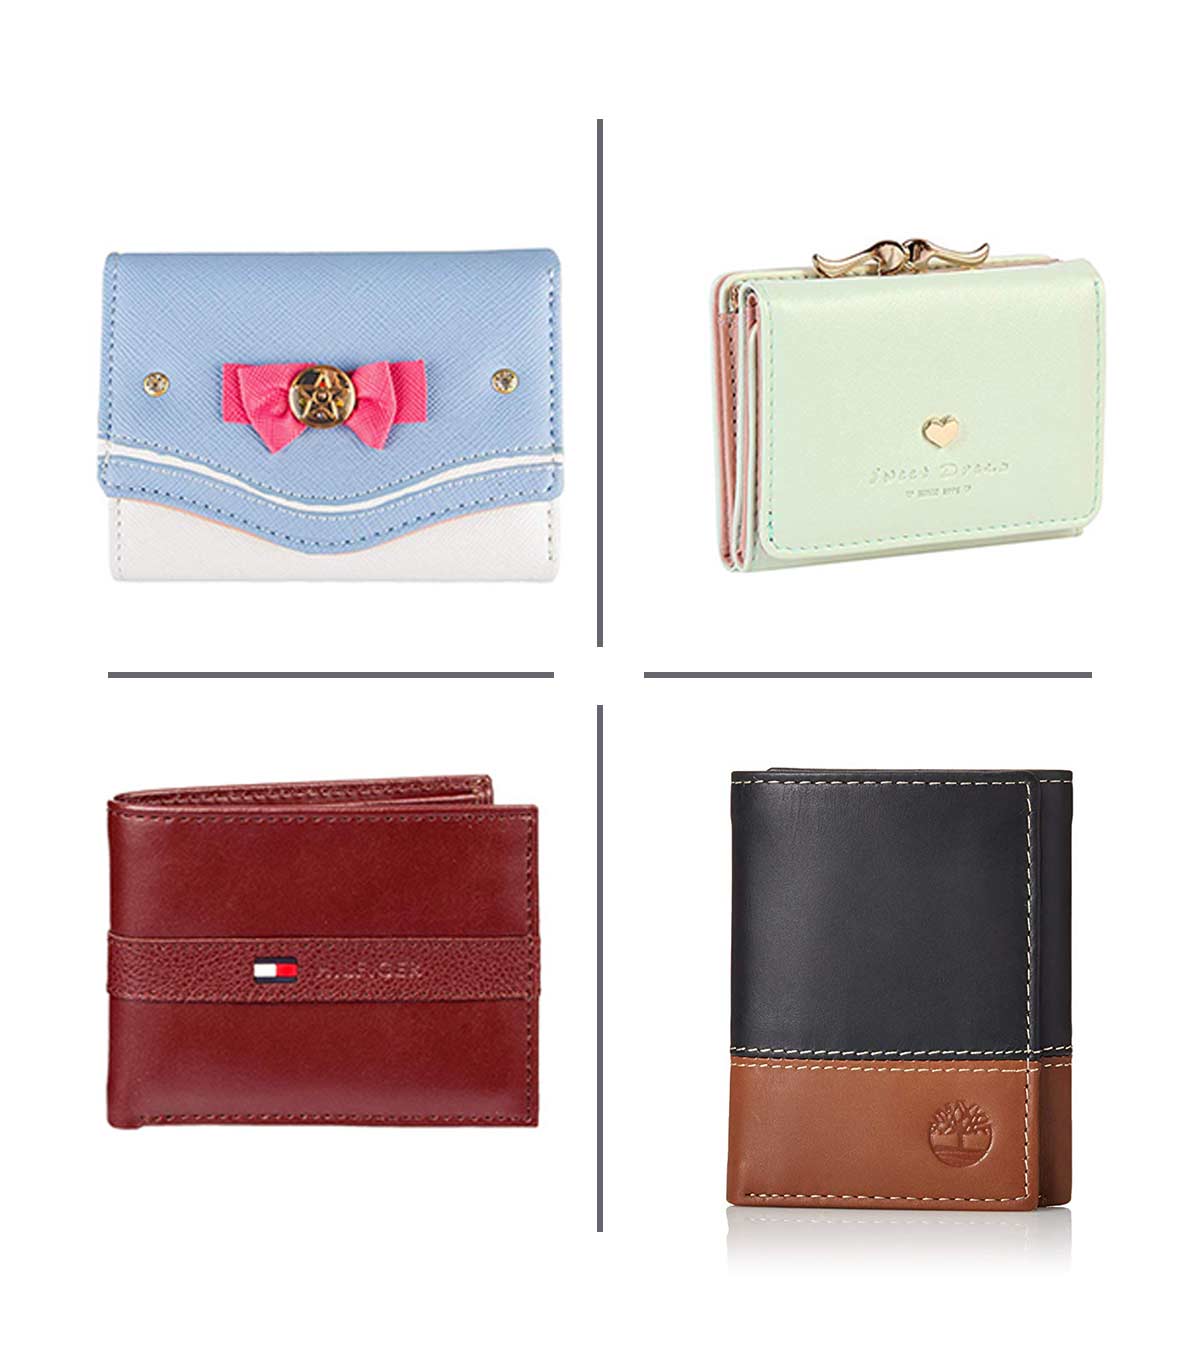 15 Best Wallets To Buy For Teens In 2022